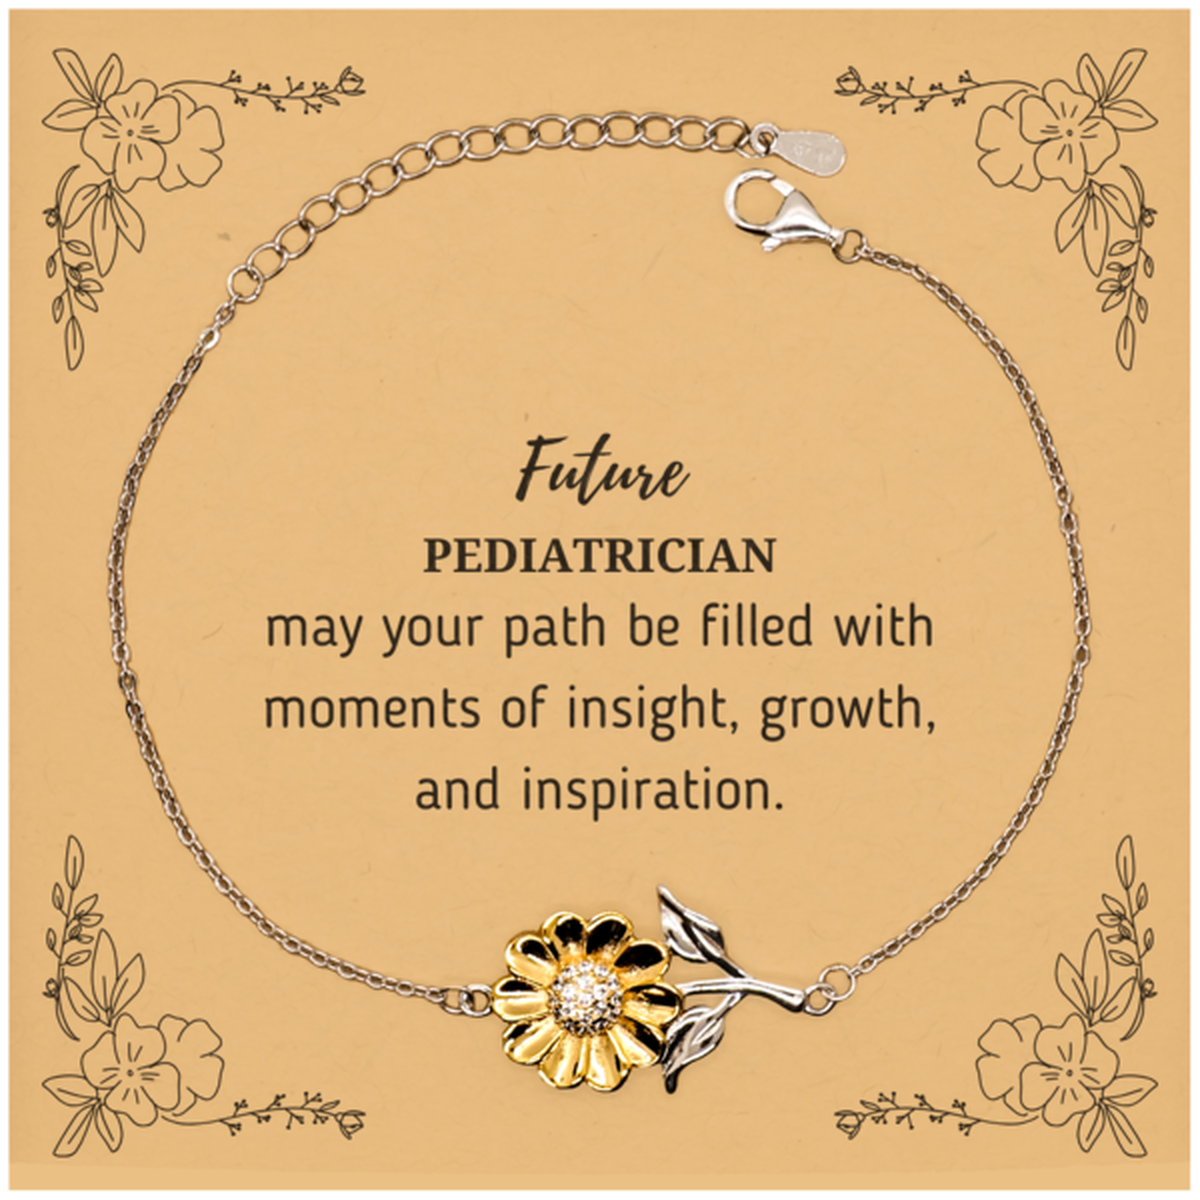 Future Pediatrician Gifts, May your path be filled with moments of insight, Graduation Gifts for New Pediatrician, Christmas Unique Sunflower Bracelet For Men, Women, Friends